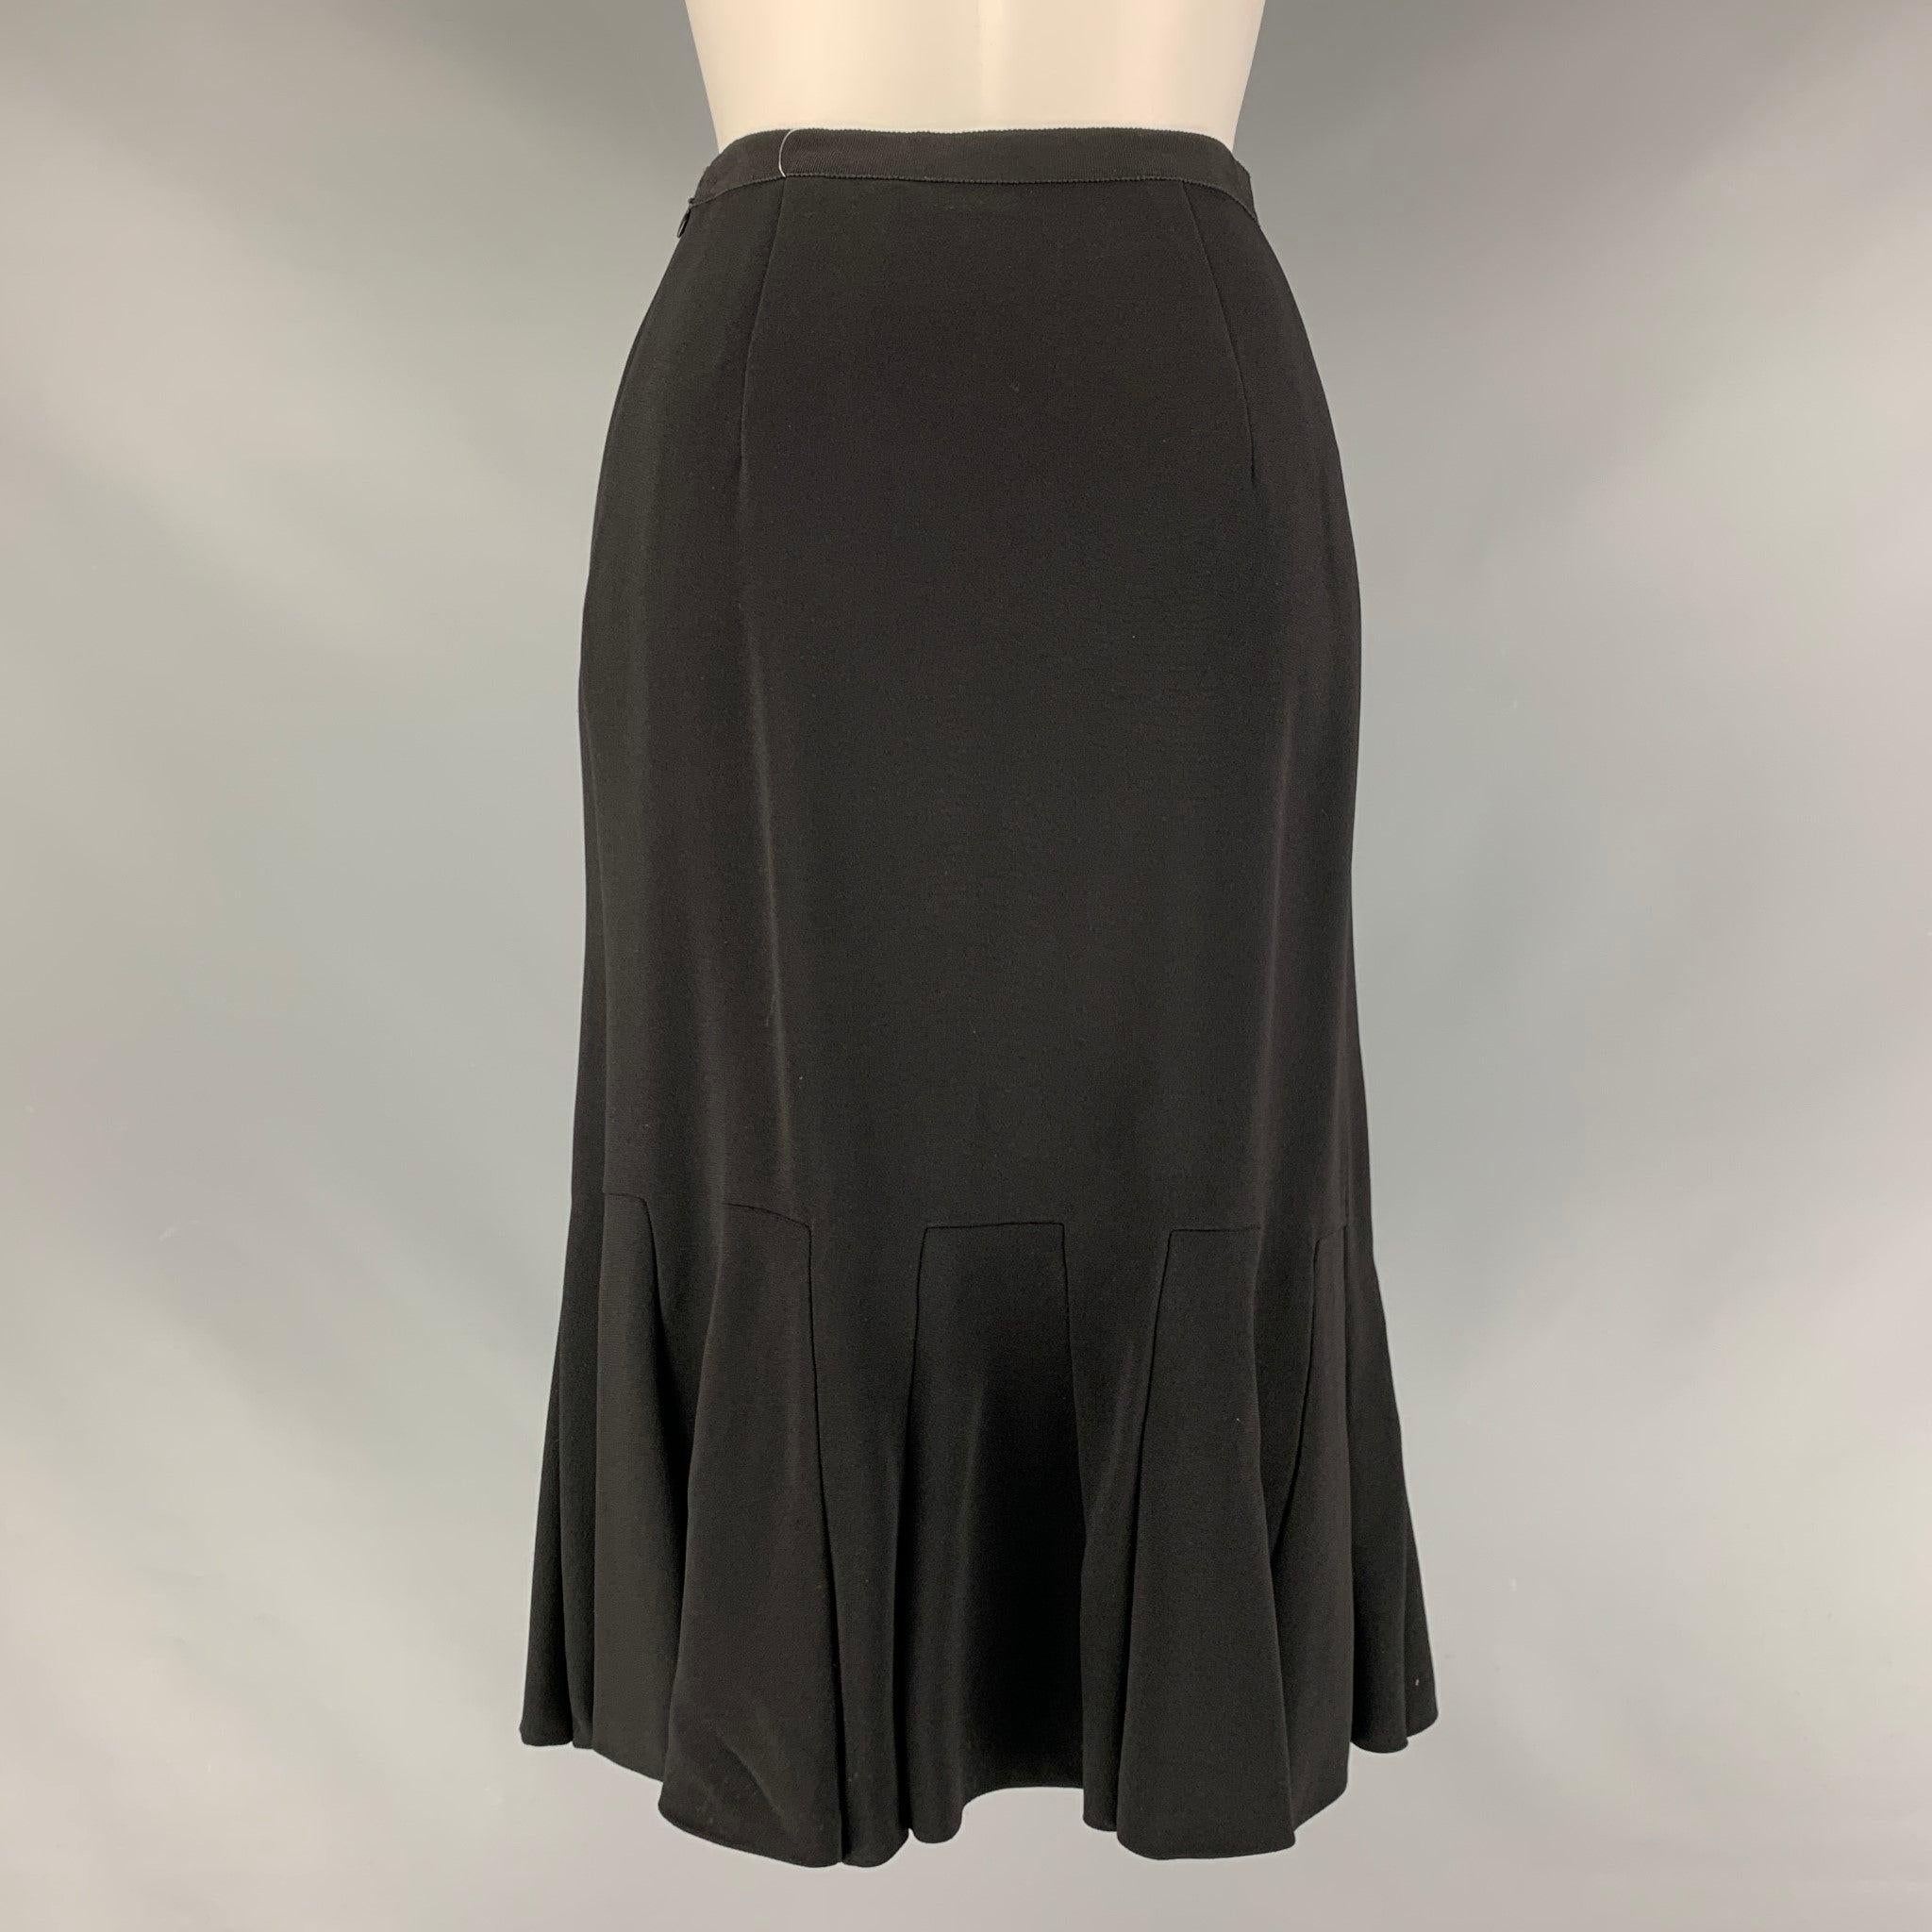 PRADA Size 4 Black Viscose & Acetate Pleated Tulip Skirt In Good Condition For Sale In San Francisco, CA